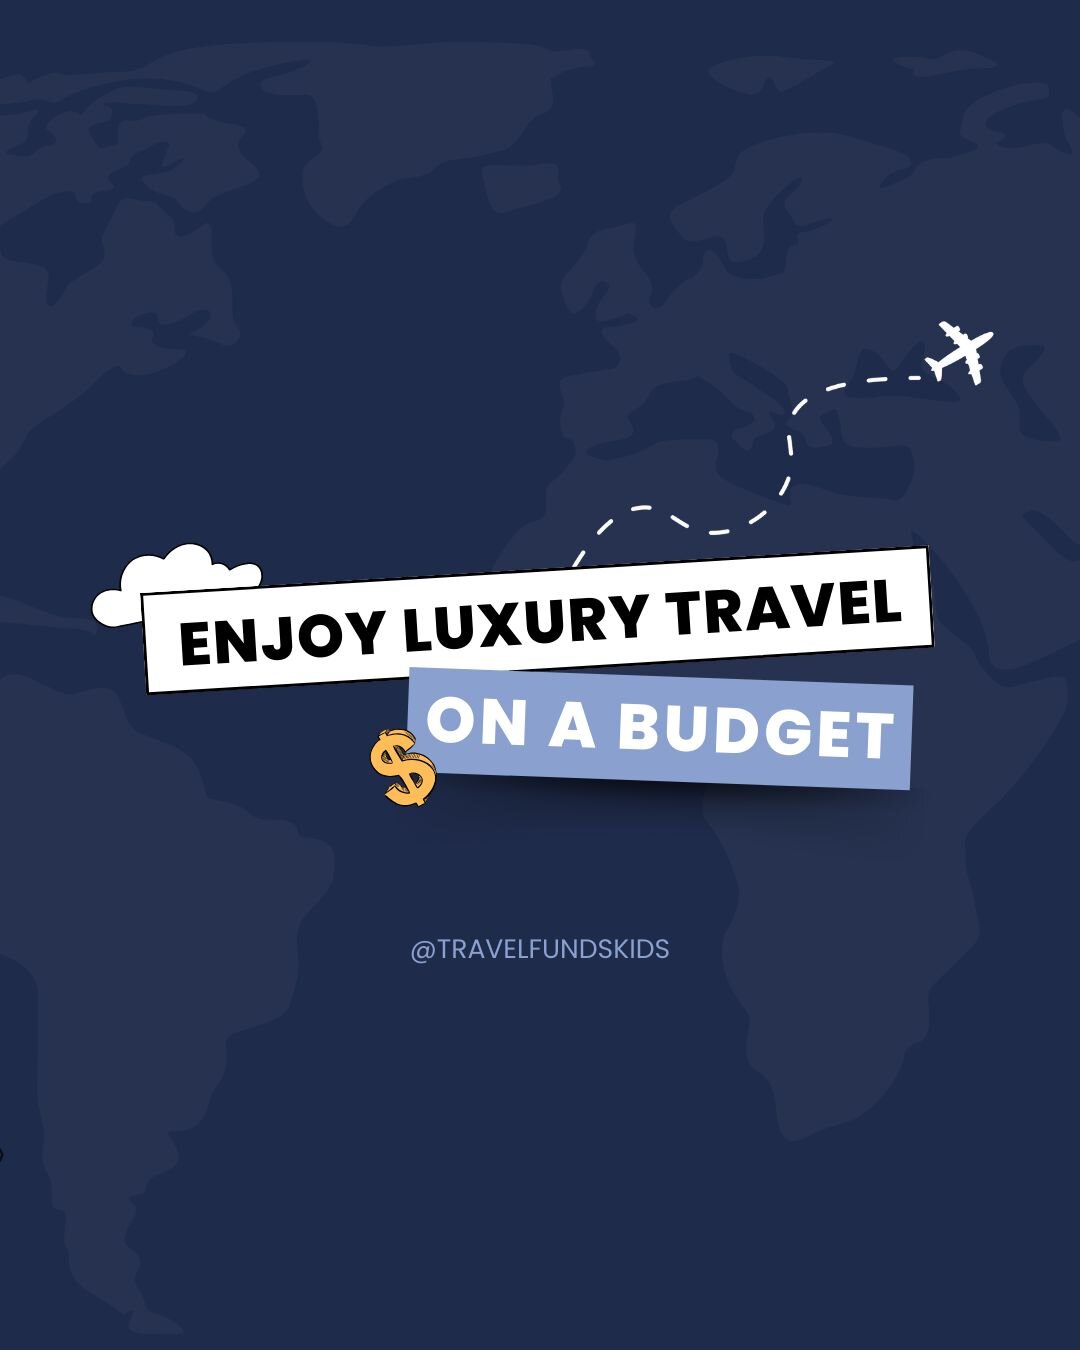 ✨LUXURY ON A BUDGET: Elevate Your Travel Experience Without Breaking the Bank! ✨ 

Who says luxury has to come with a hefty price tag? By using these smart tips, you can enjoy high-end experiences without draining your wallet. 💵 💰

Join us for a bu